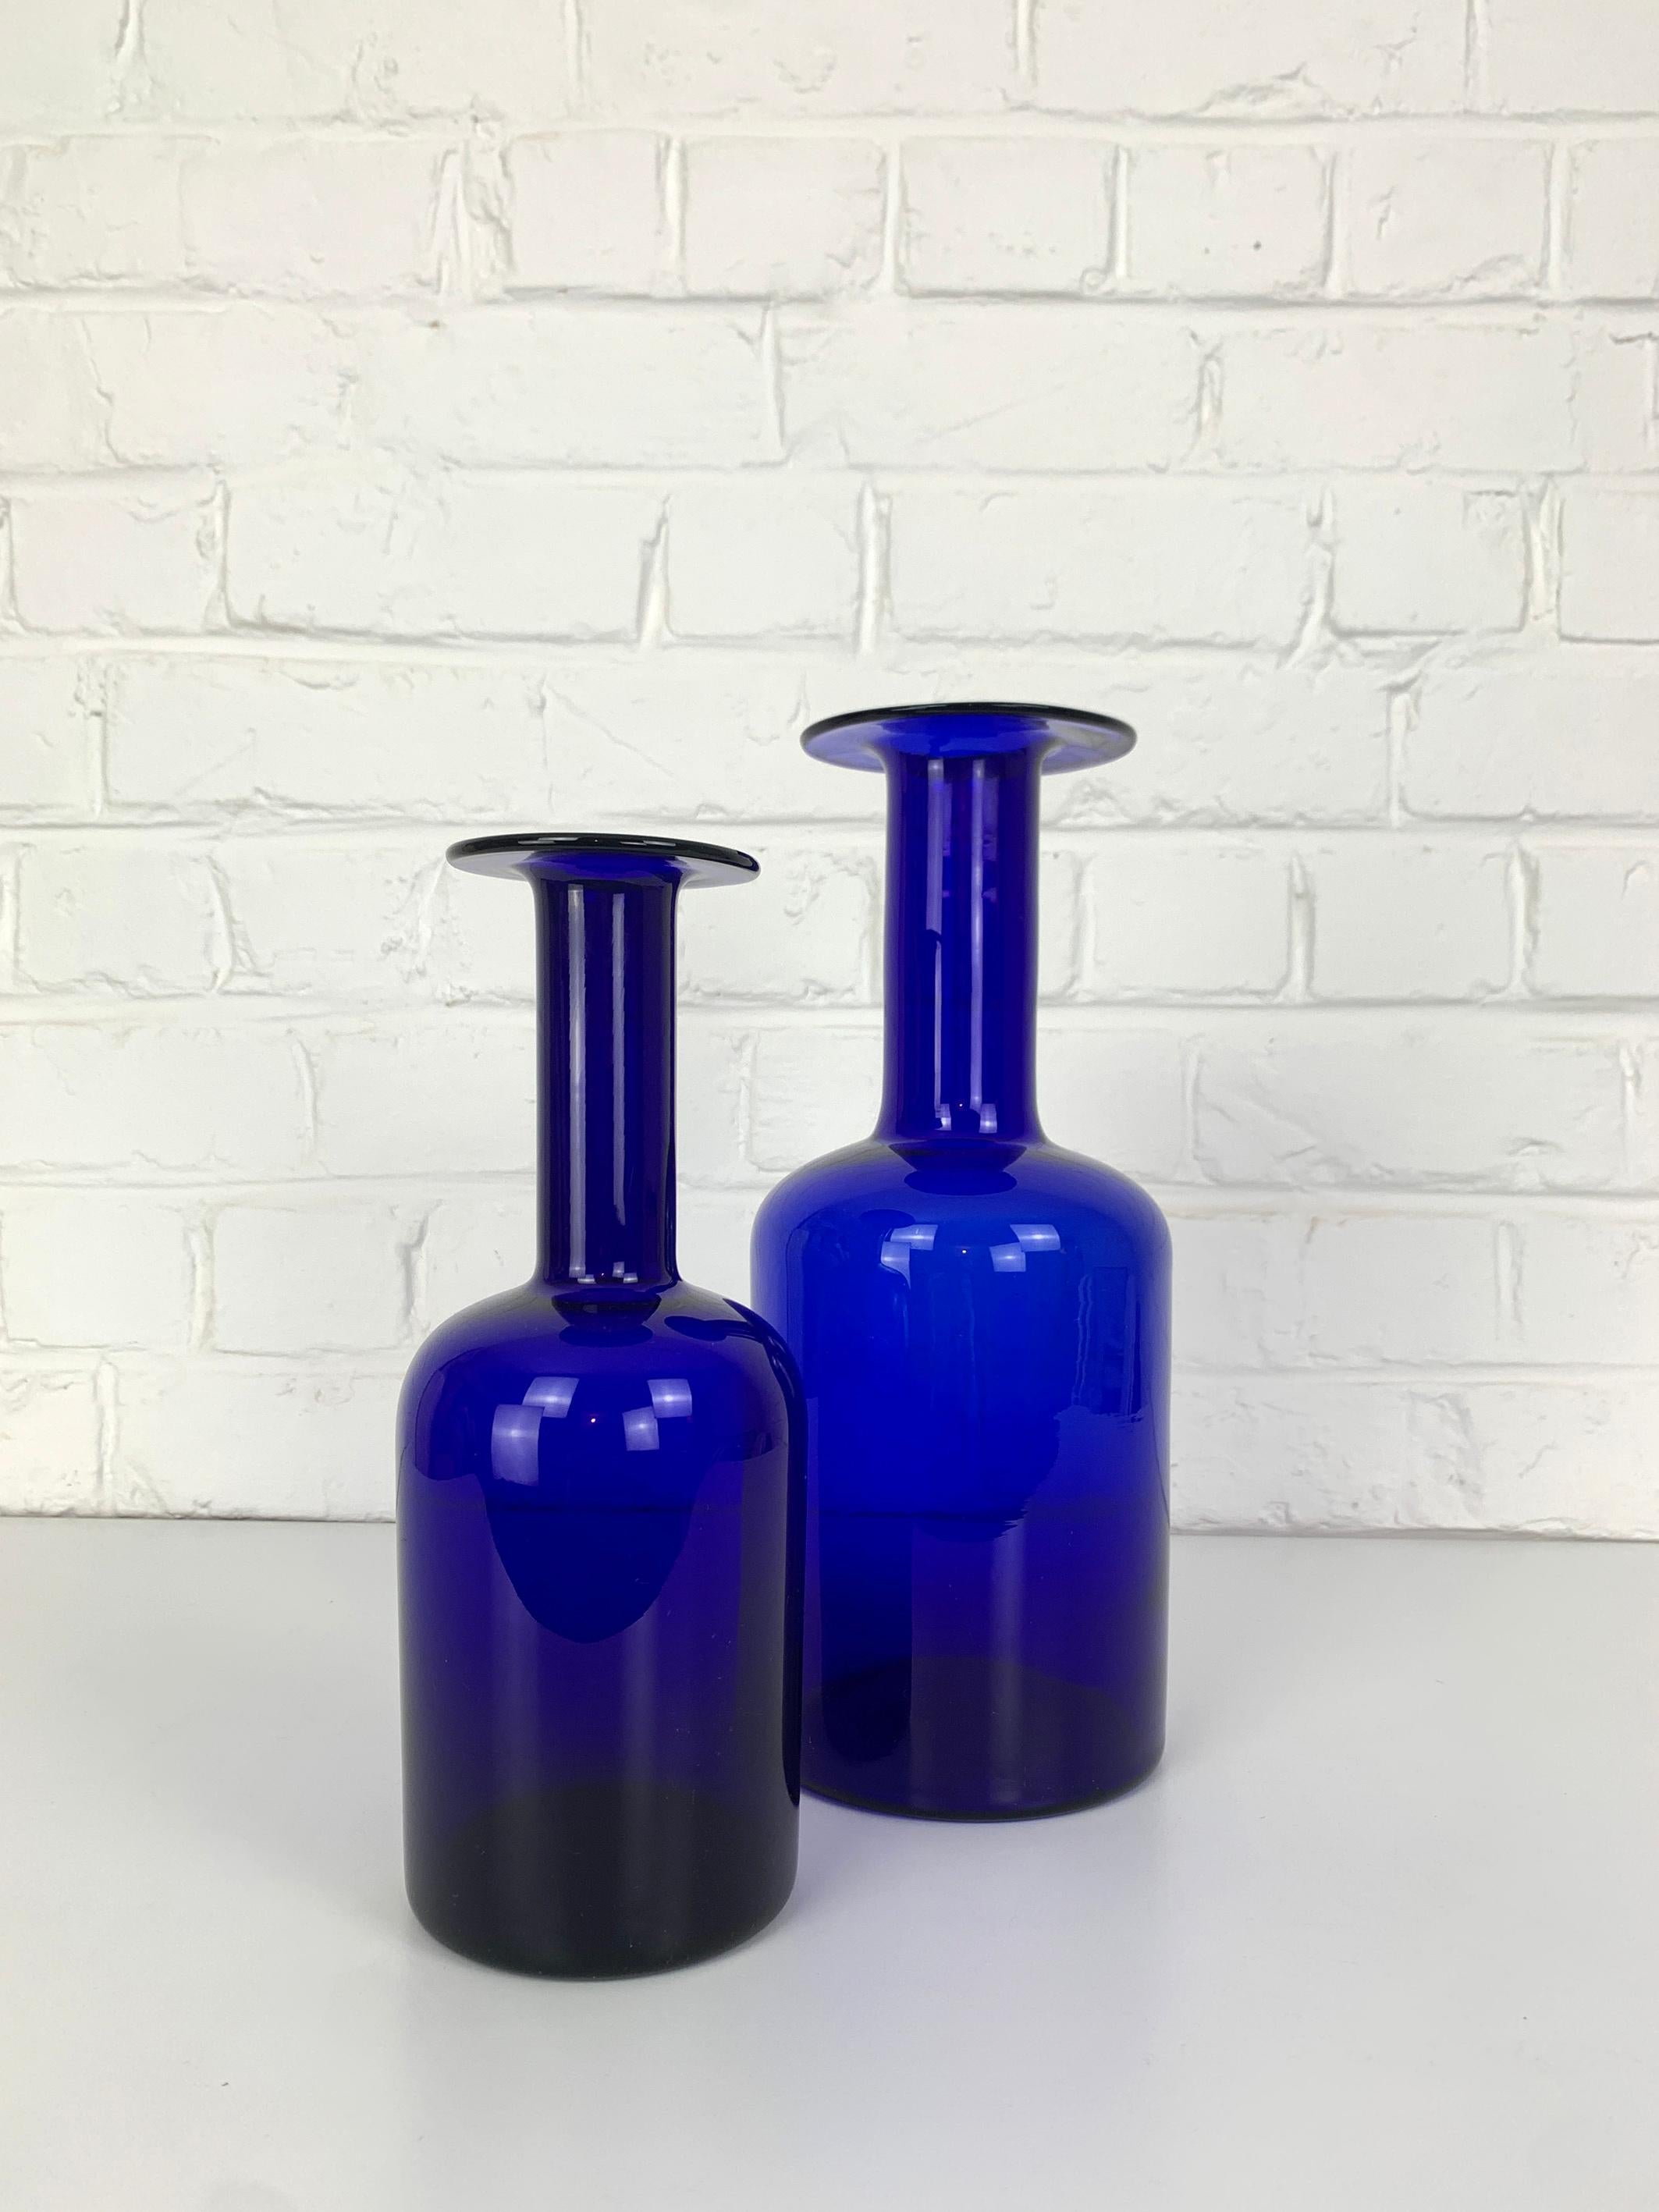 Set of two Mid-Century Holmegaard Gulv-Vases by Otto Brauer, in deep Cobalt Blue. 

These typical Danish Modern glass bottle vases were manufactured by Kastrup Holmegaard in Denmark during the 1950s or 1960s. The original labels have fallen off.